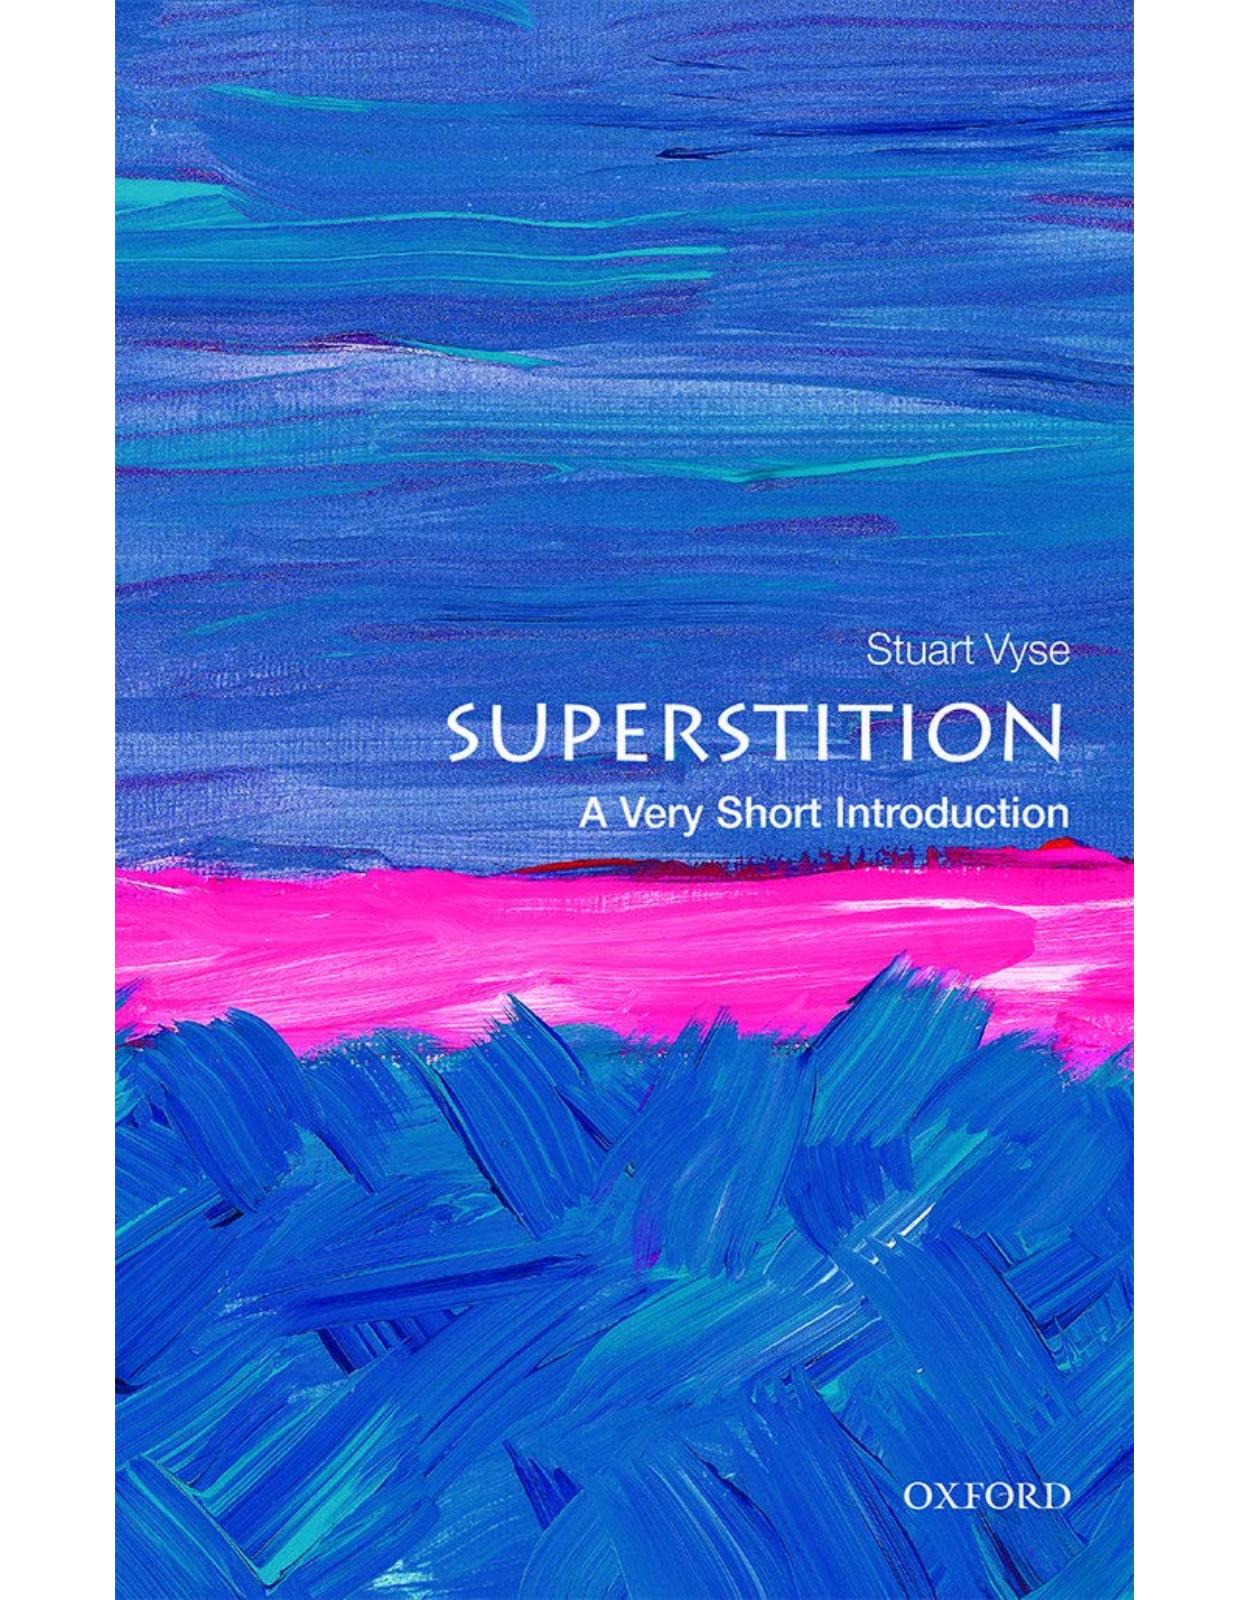 Superstition: A Very Short Introduction